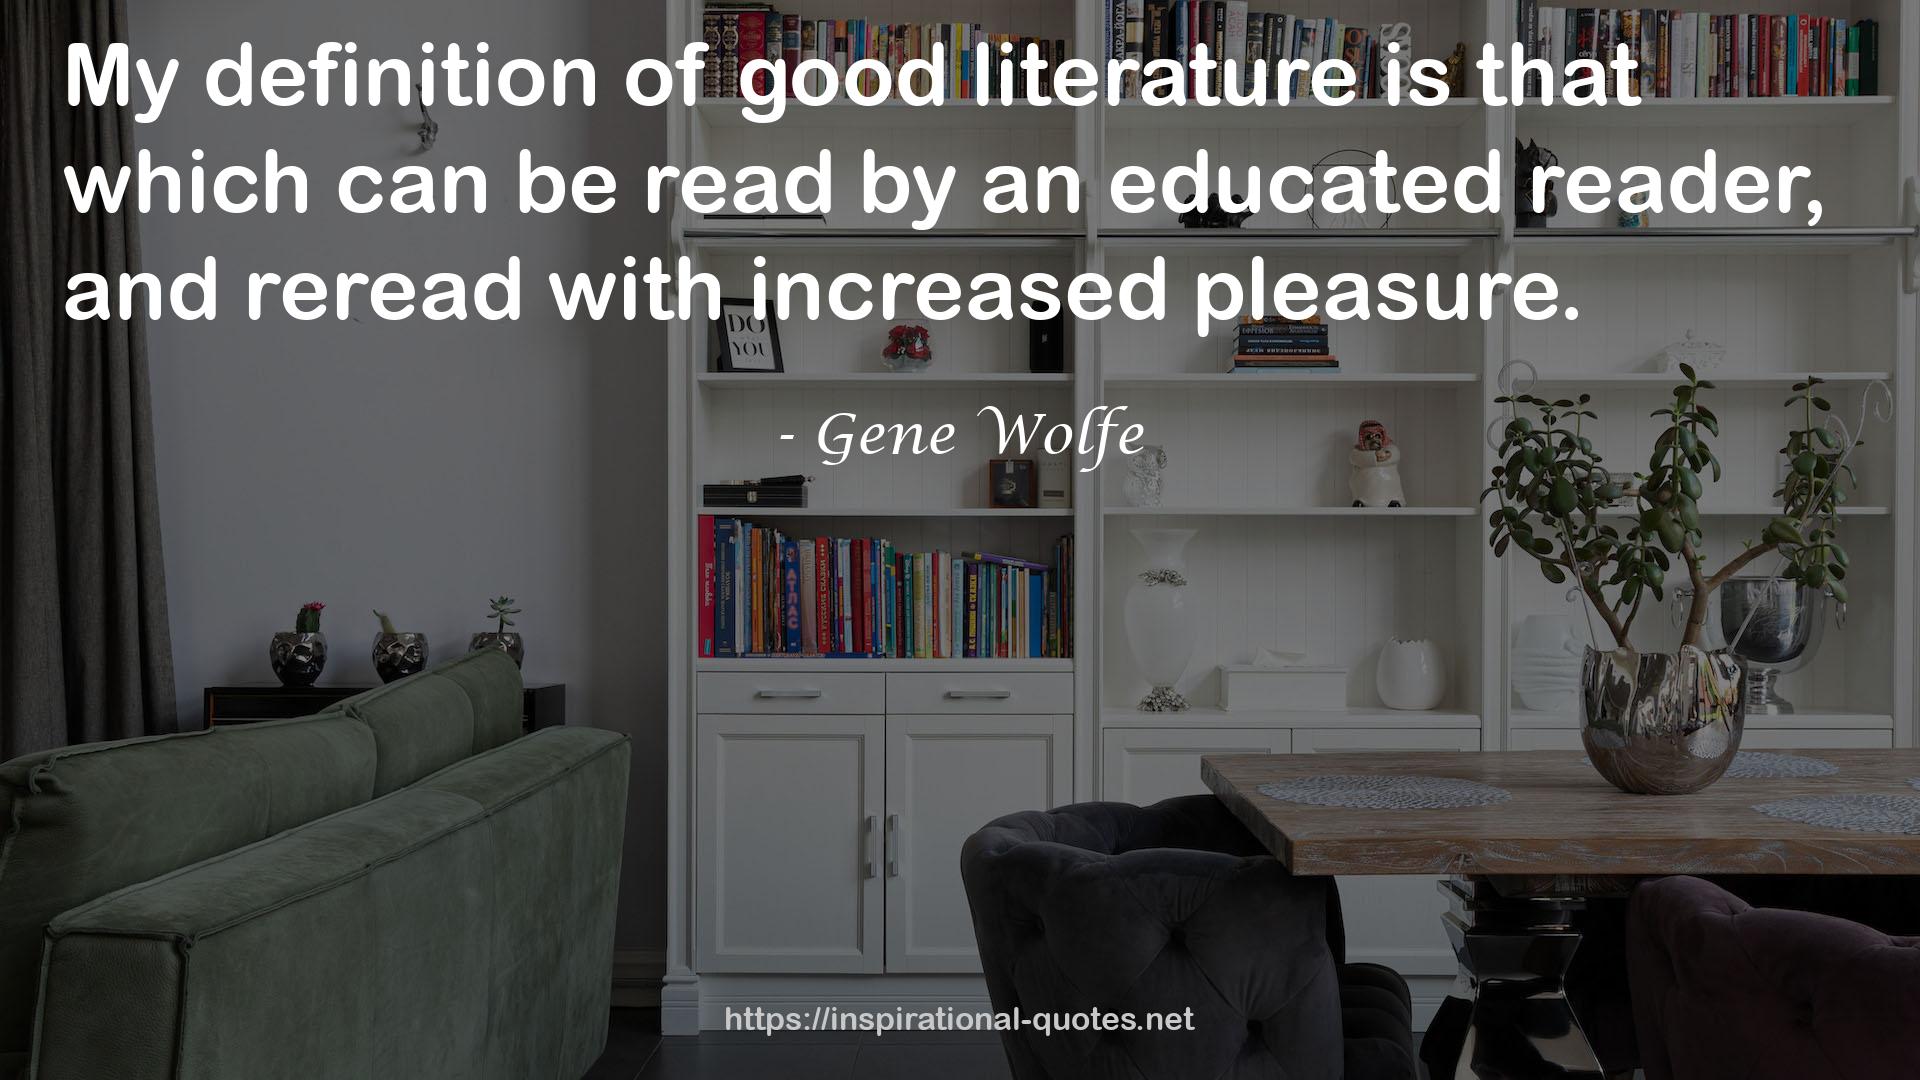 Gene Wolfe QUOTES